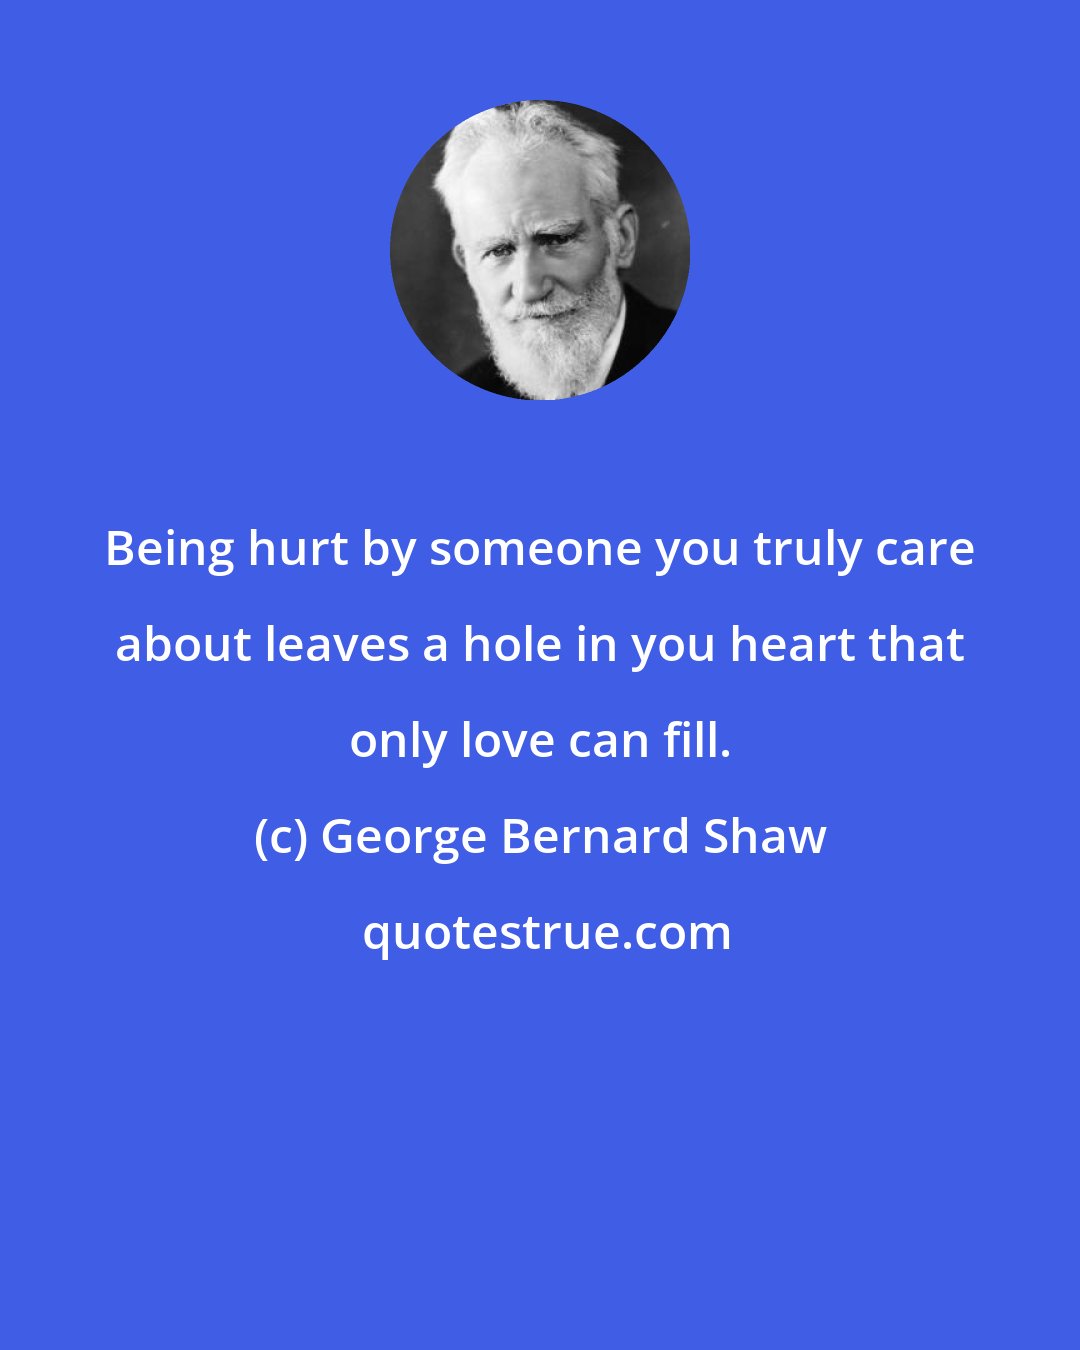 George Bernard Shaw: Being hurt by someone you truly care about leaves a hole in you heart that only love can fill.